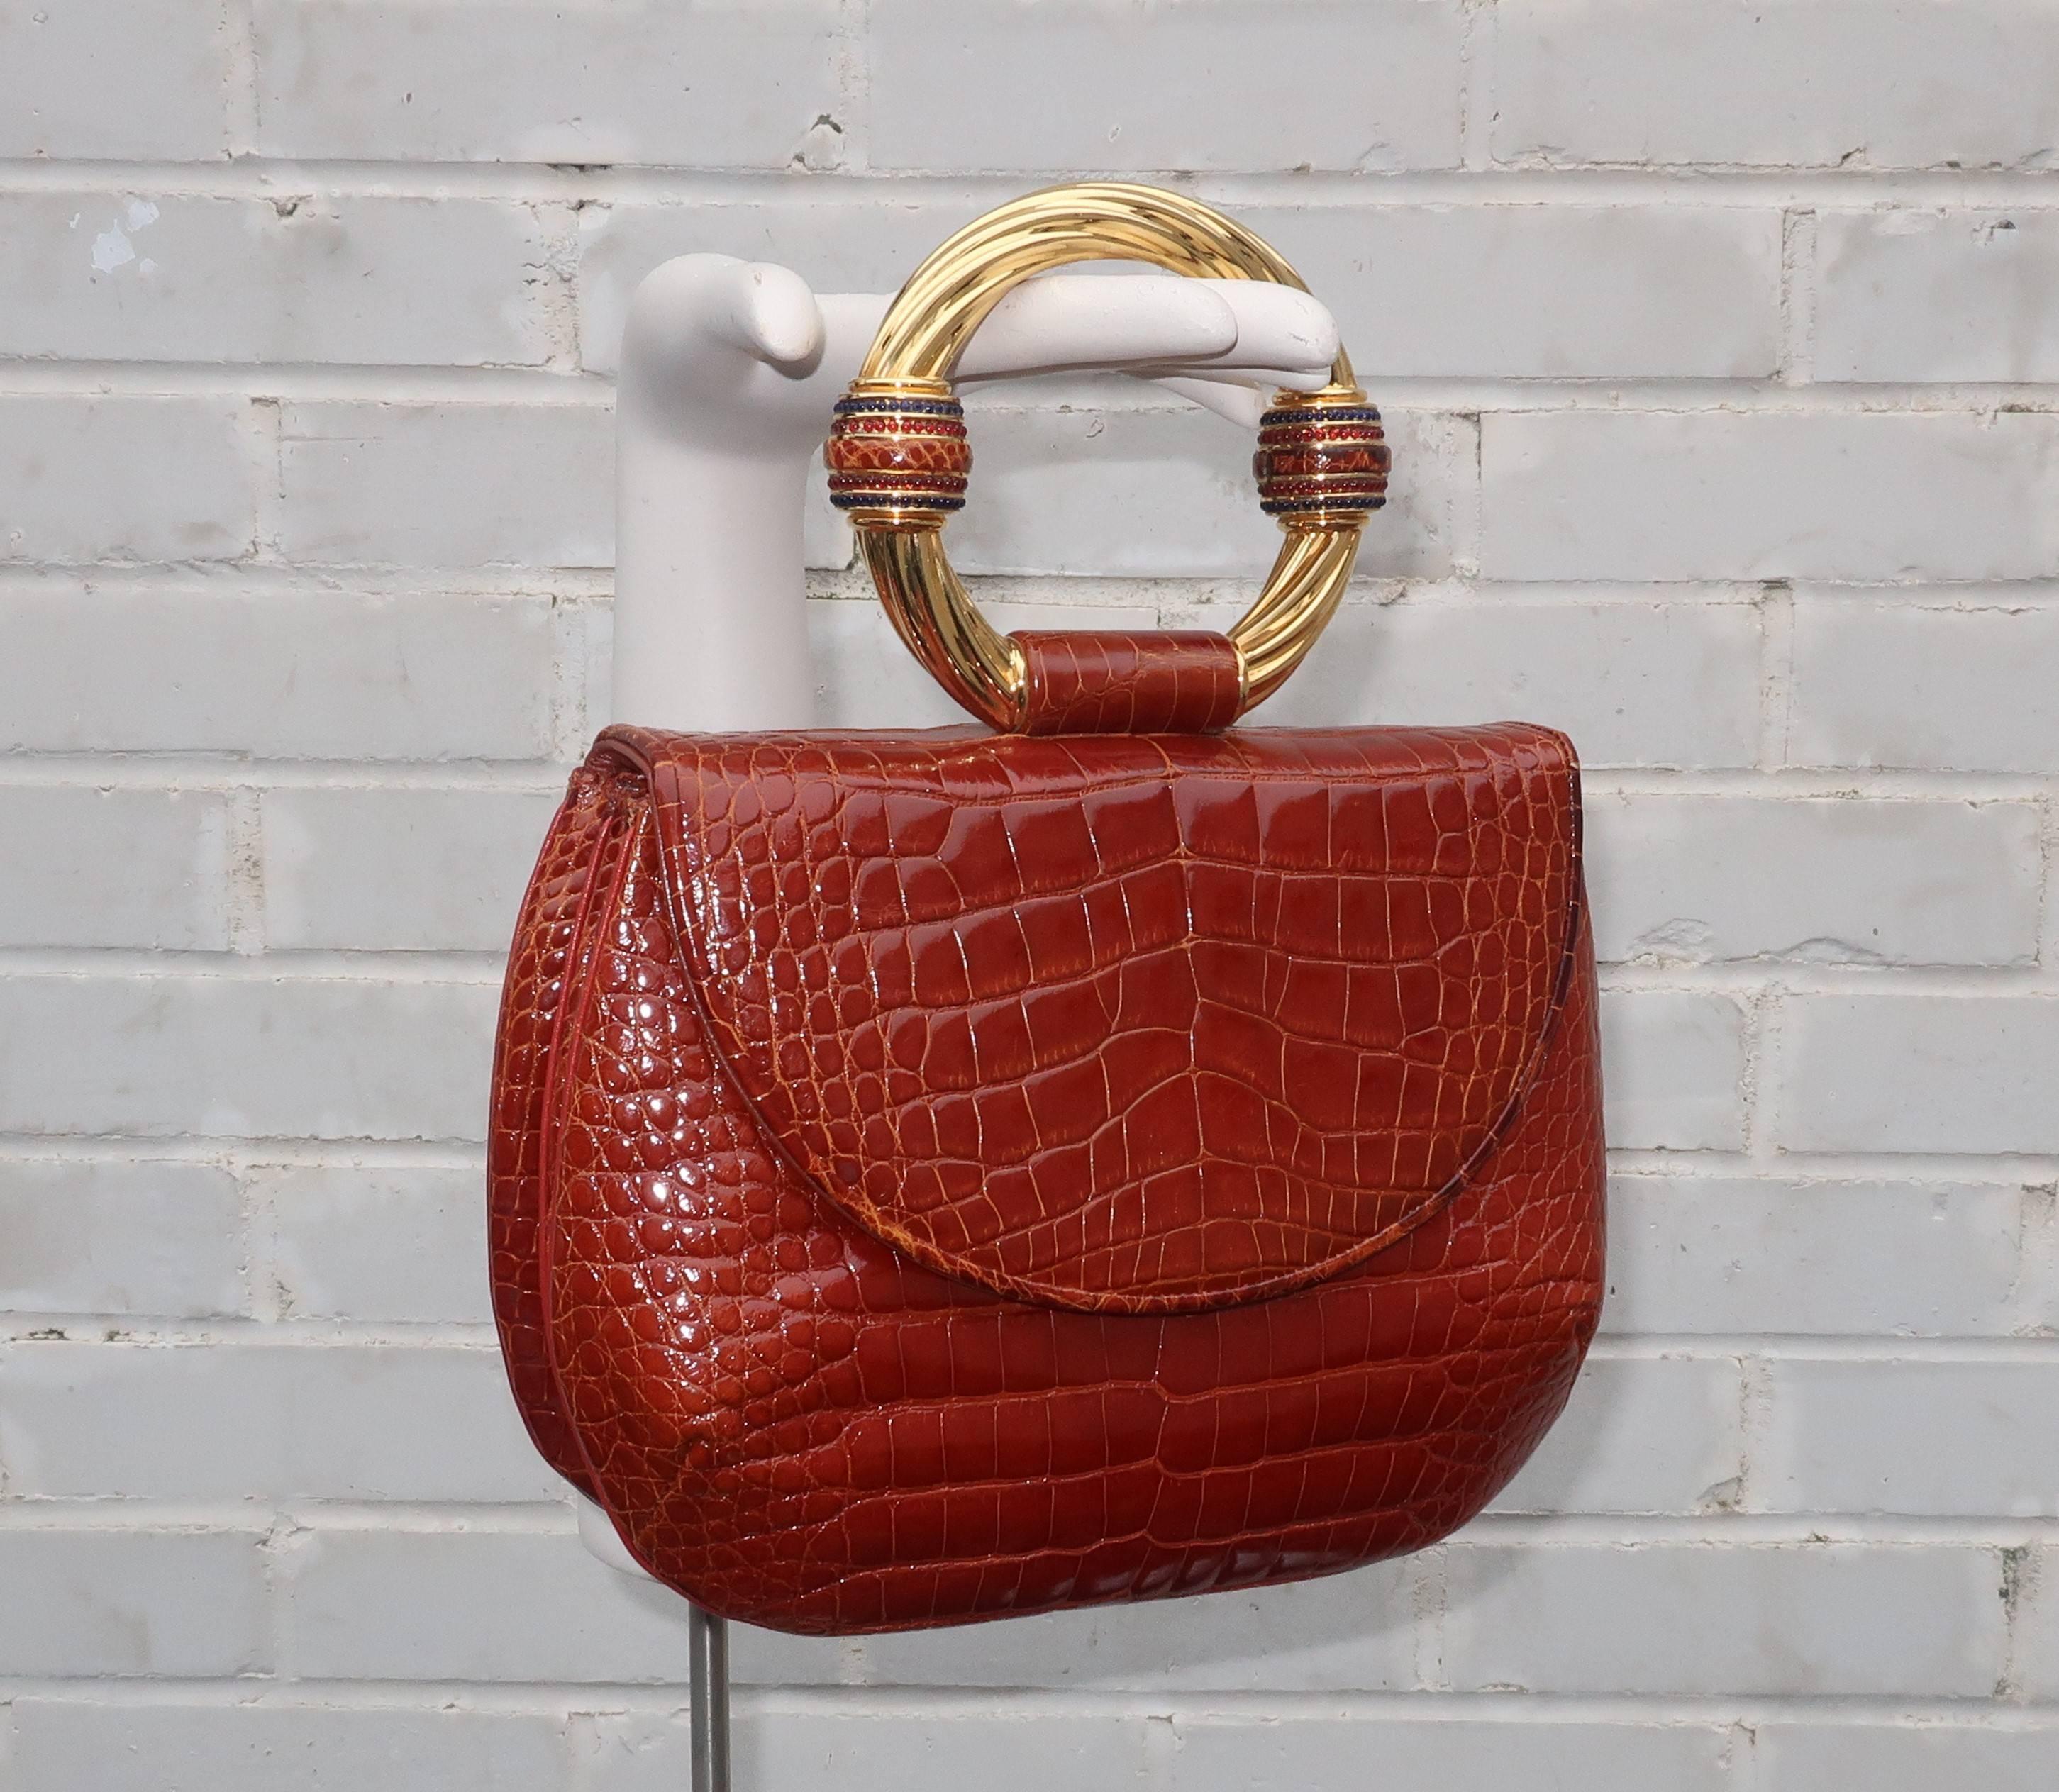 This stunning Judith Leiber alligator handbag serves double duty as a piece of costume jewelry for the wrist.  The versatile cognac colored skin is embellished with a large ring shaped gold tone metal handle.  The handle is decorated with skin and